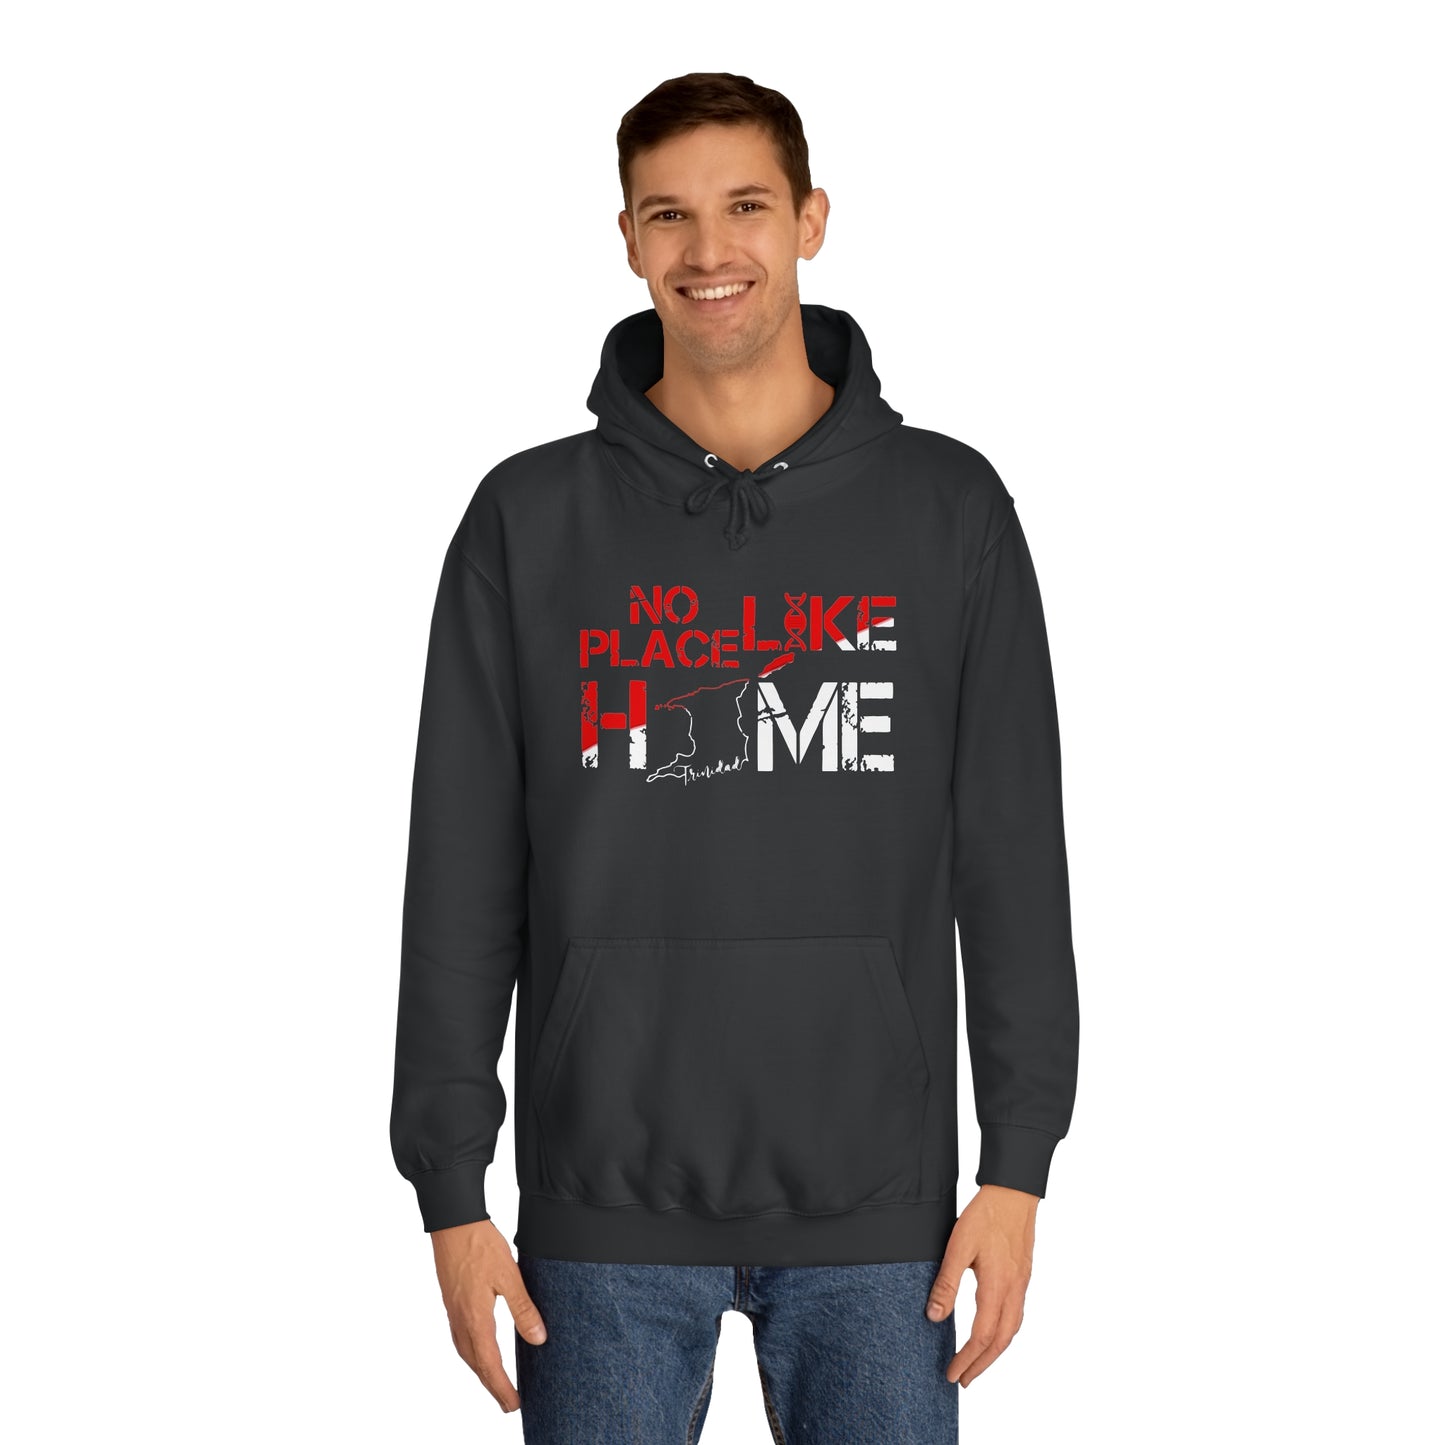 No Place Like Home - Mical Teja -  College Hoodie